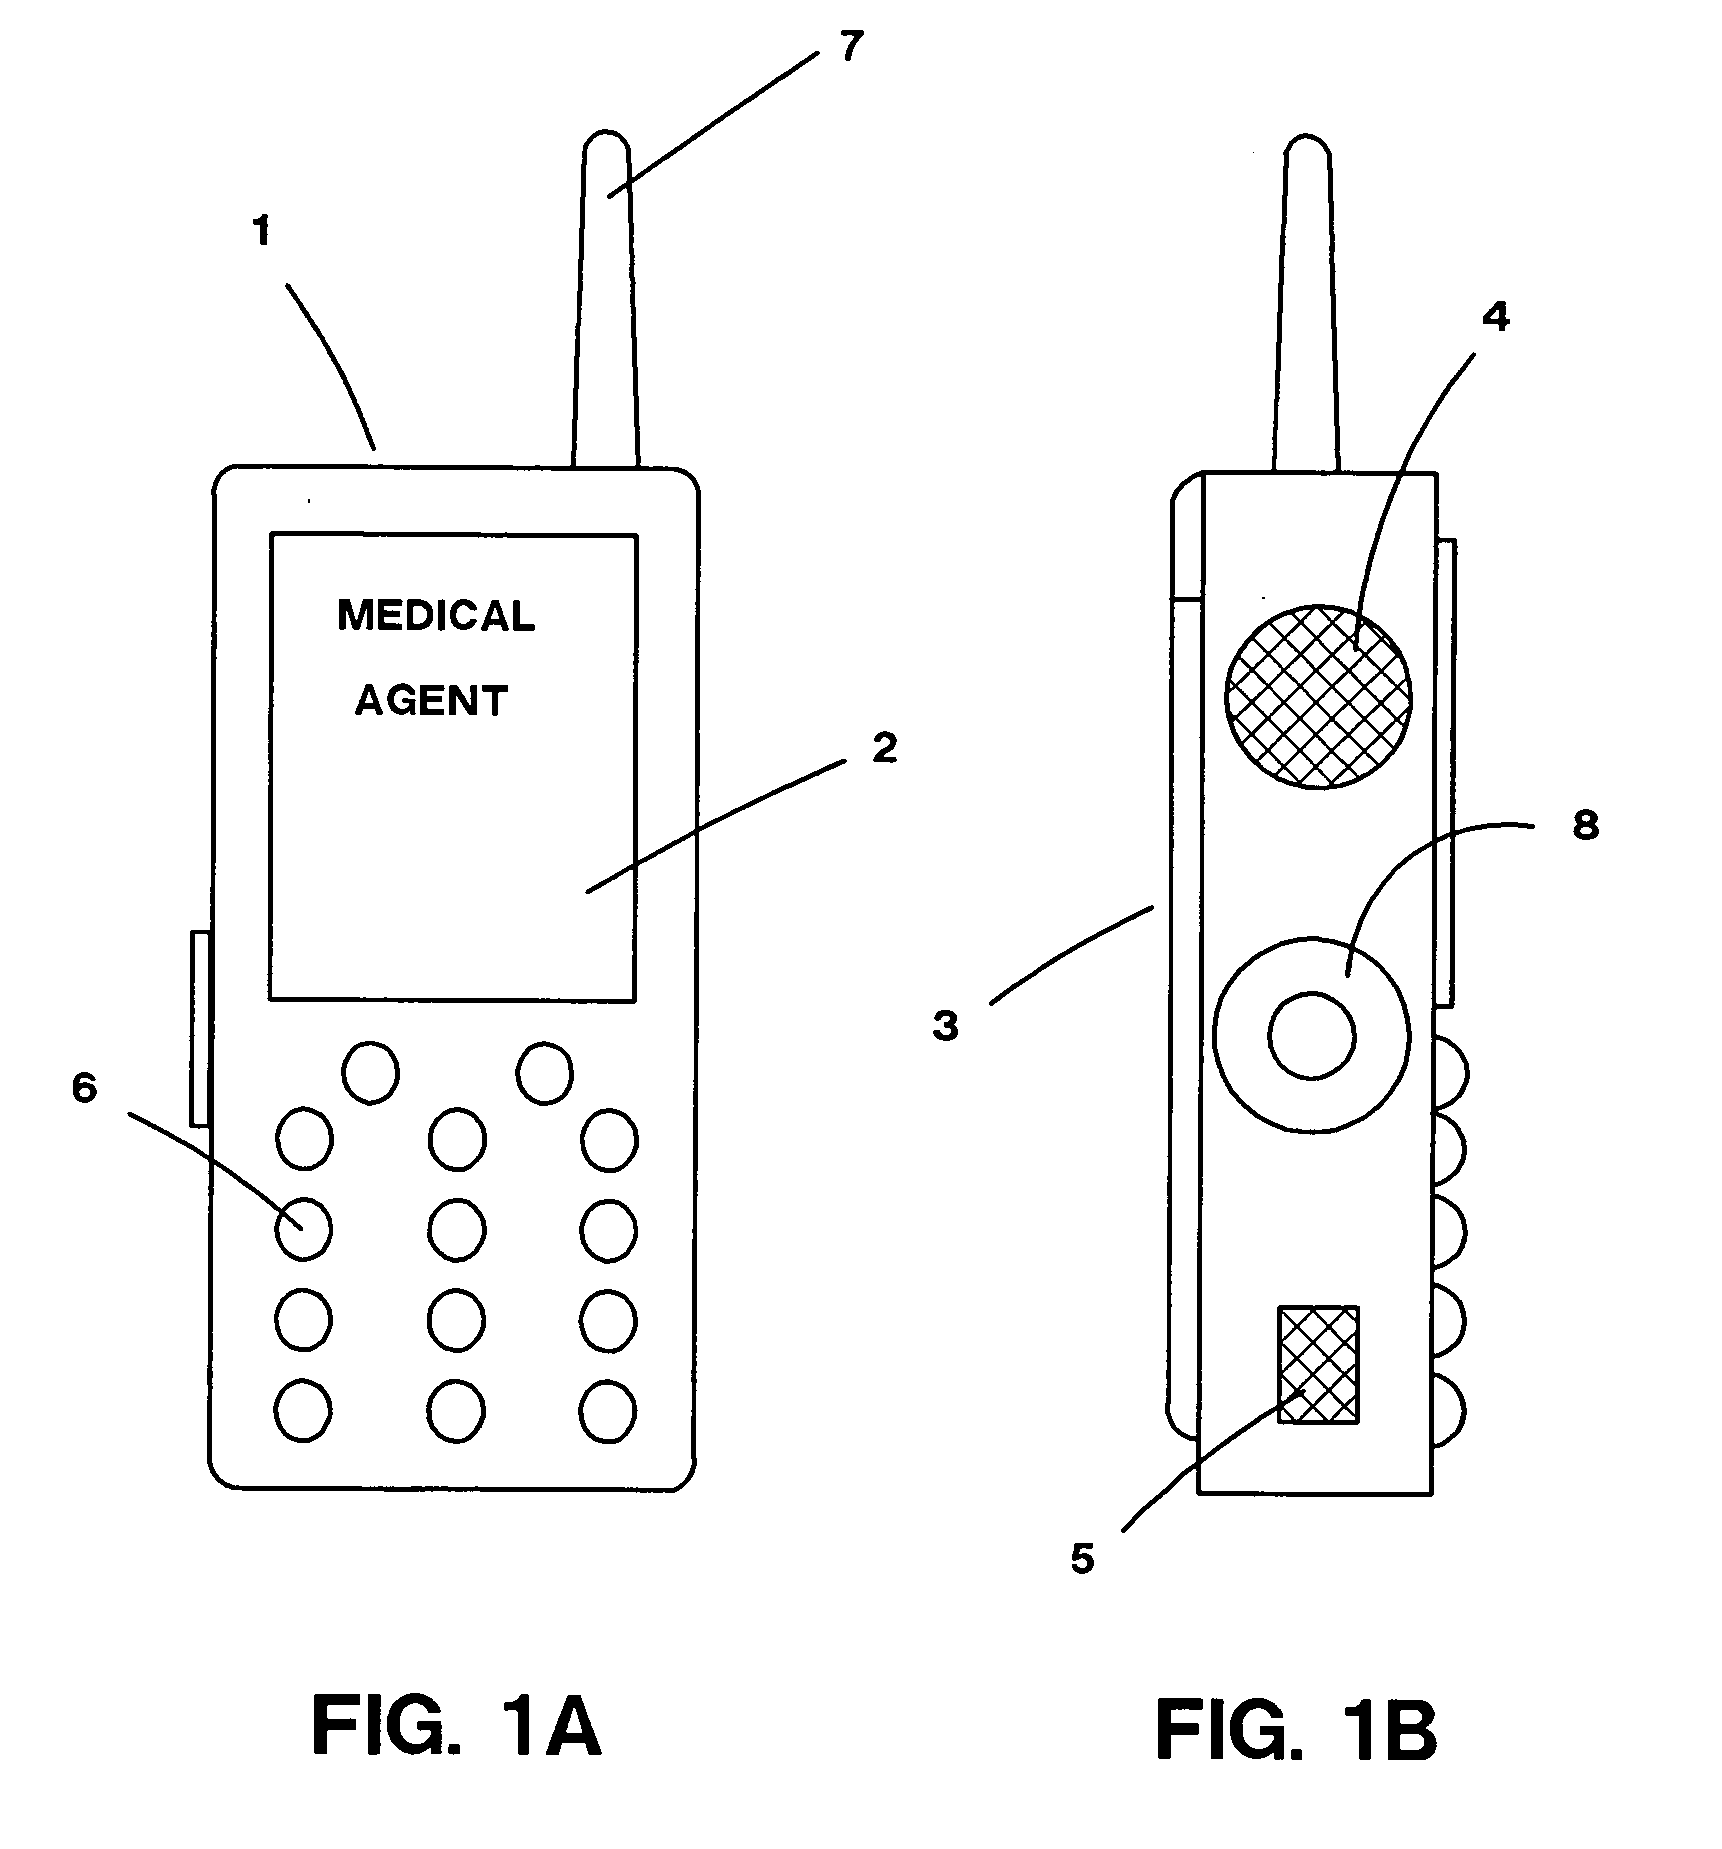 Emergency medical diagnosis and communications device